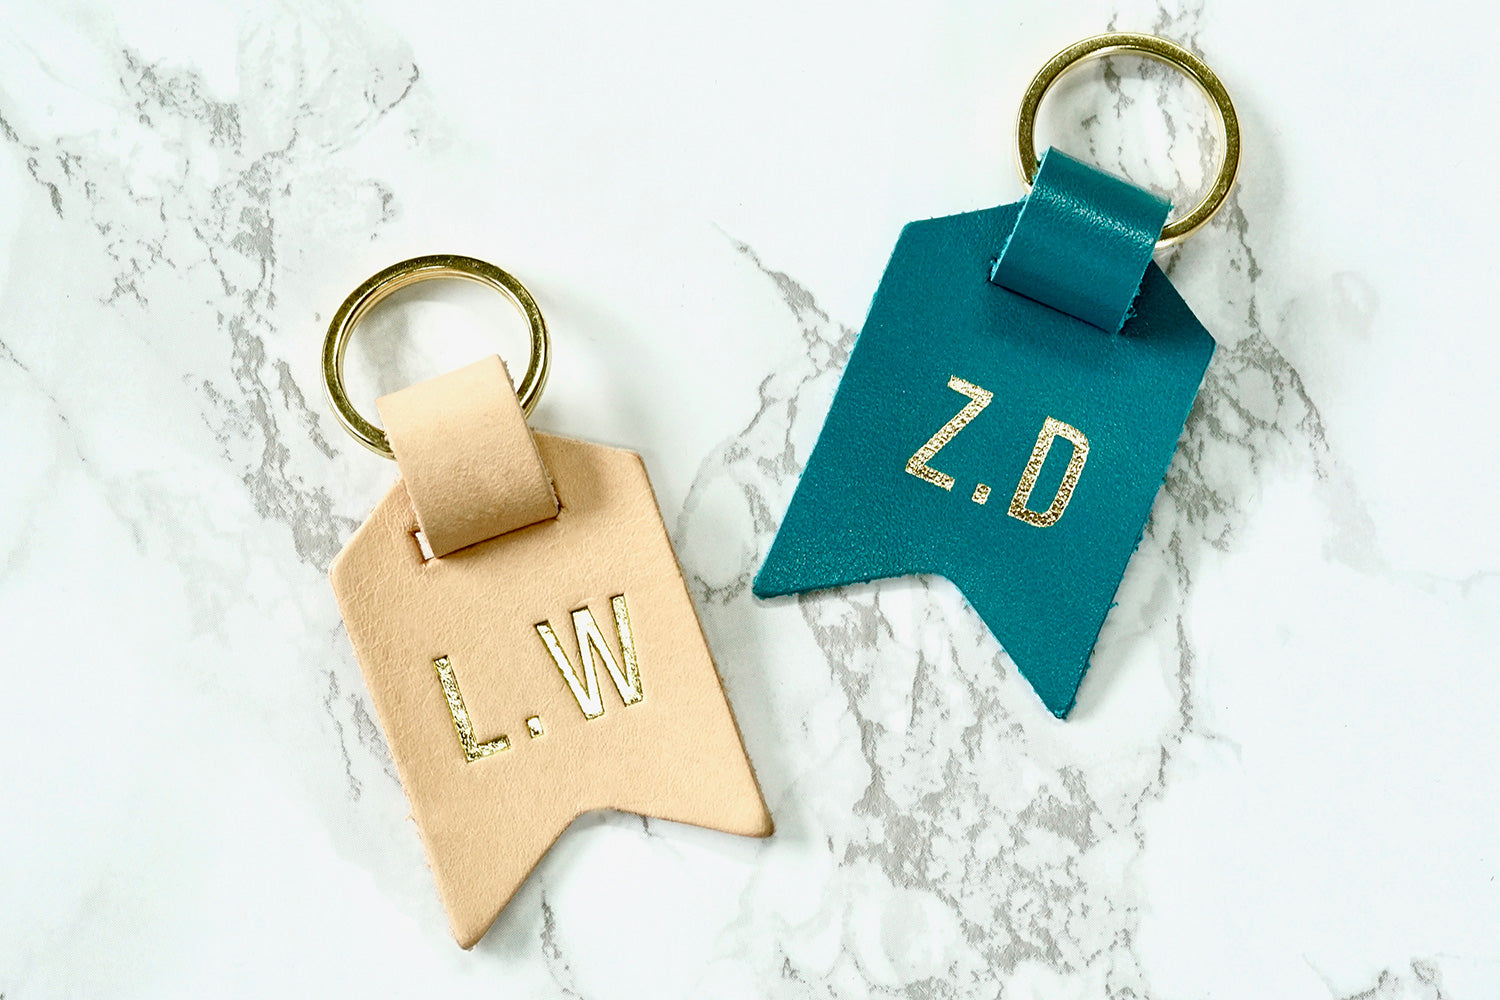 Monogram keychain from Bookshell bindery embossed with gold foil